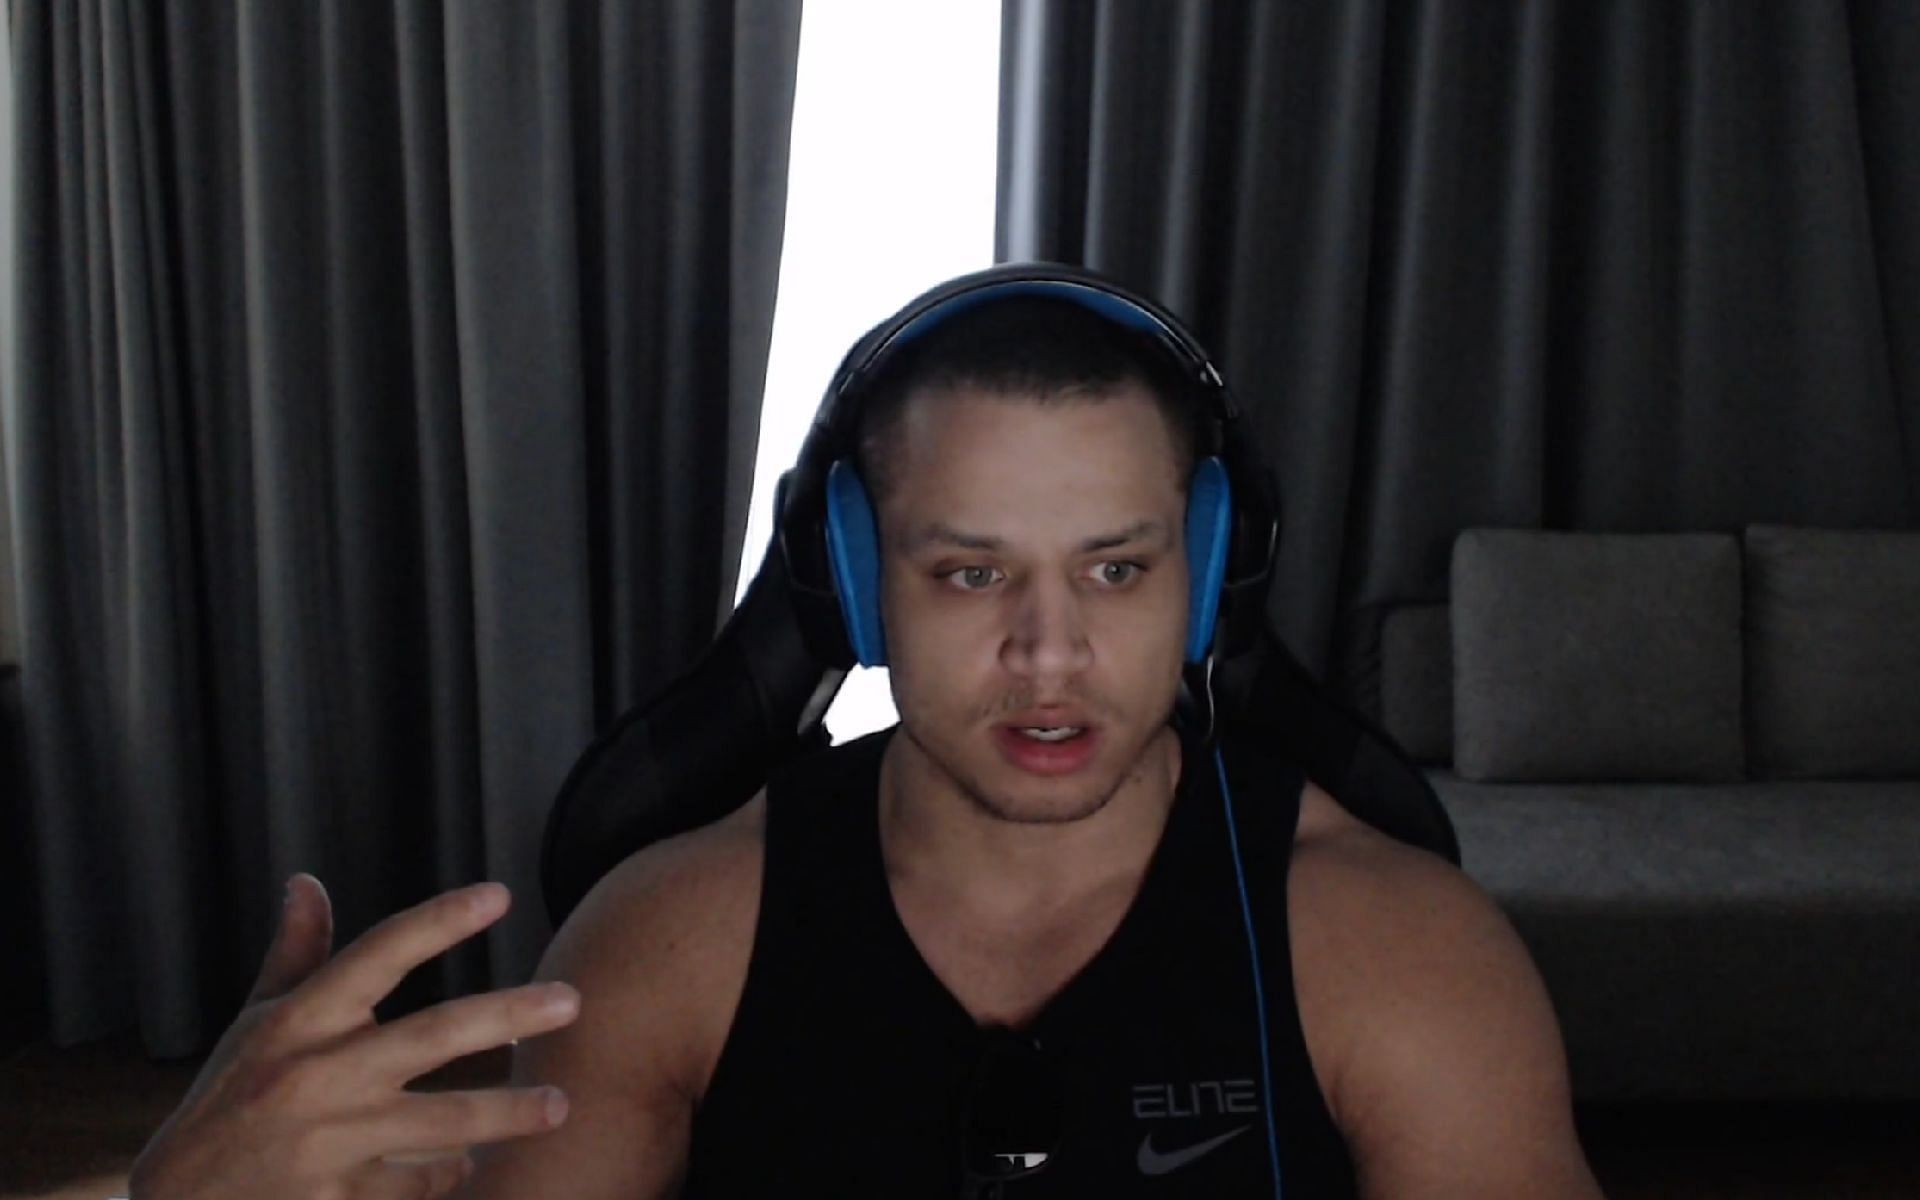 Tyler1 finds himself in an awkward position during a recent livestream